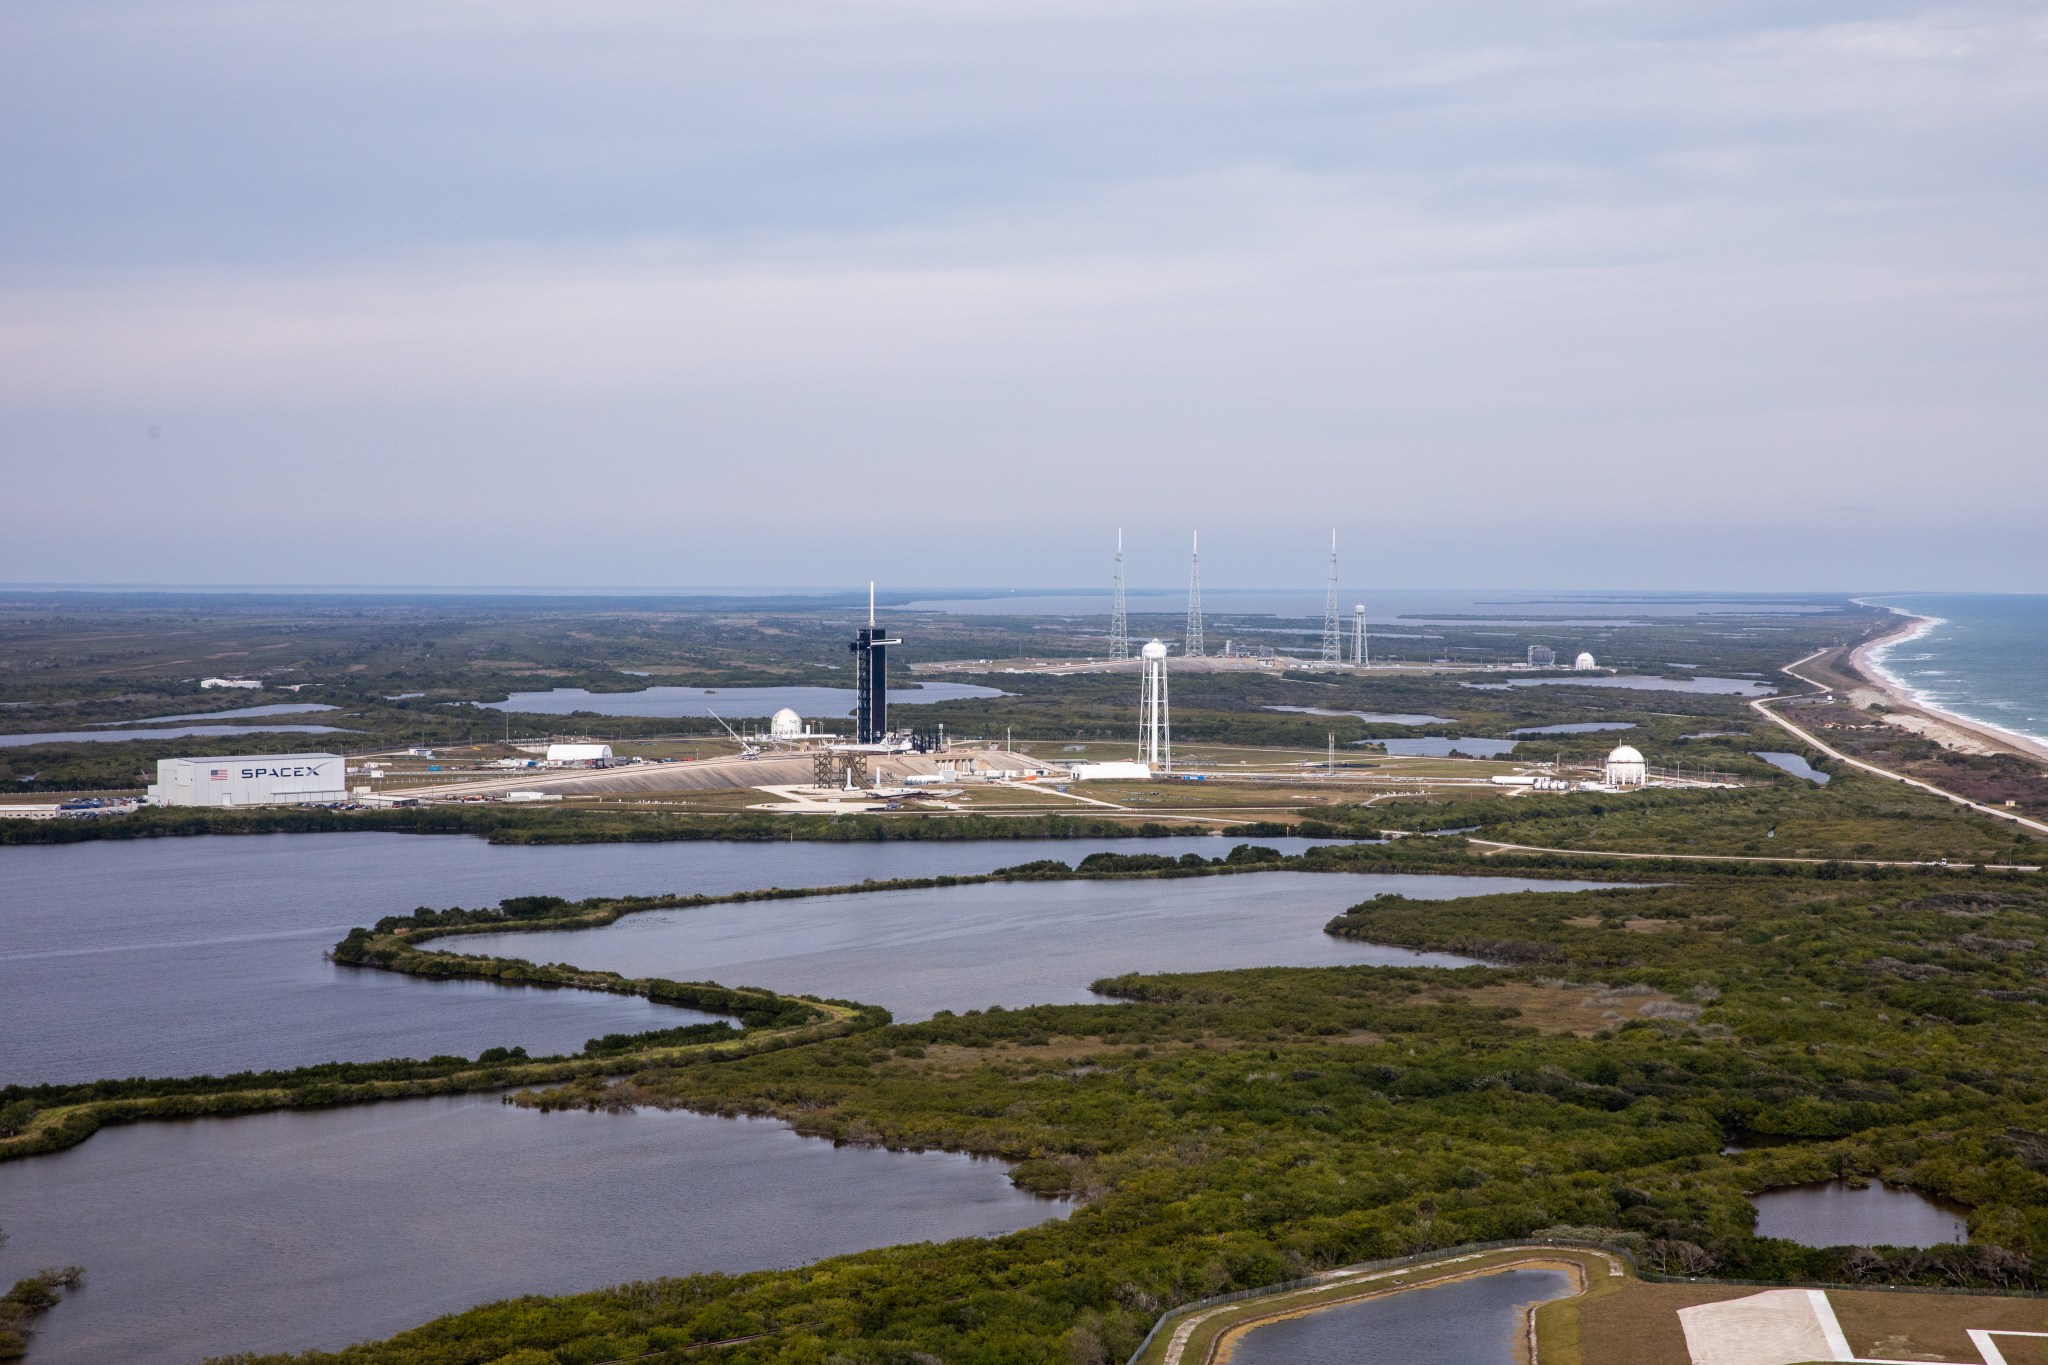 A proposed site for Launch Complex 49 is north of historic launch pads 39A and 39B on the Atlantic Ocean and still within NASA Kennedy Space Center's security perimeter.